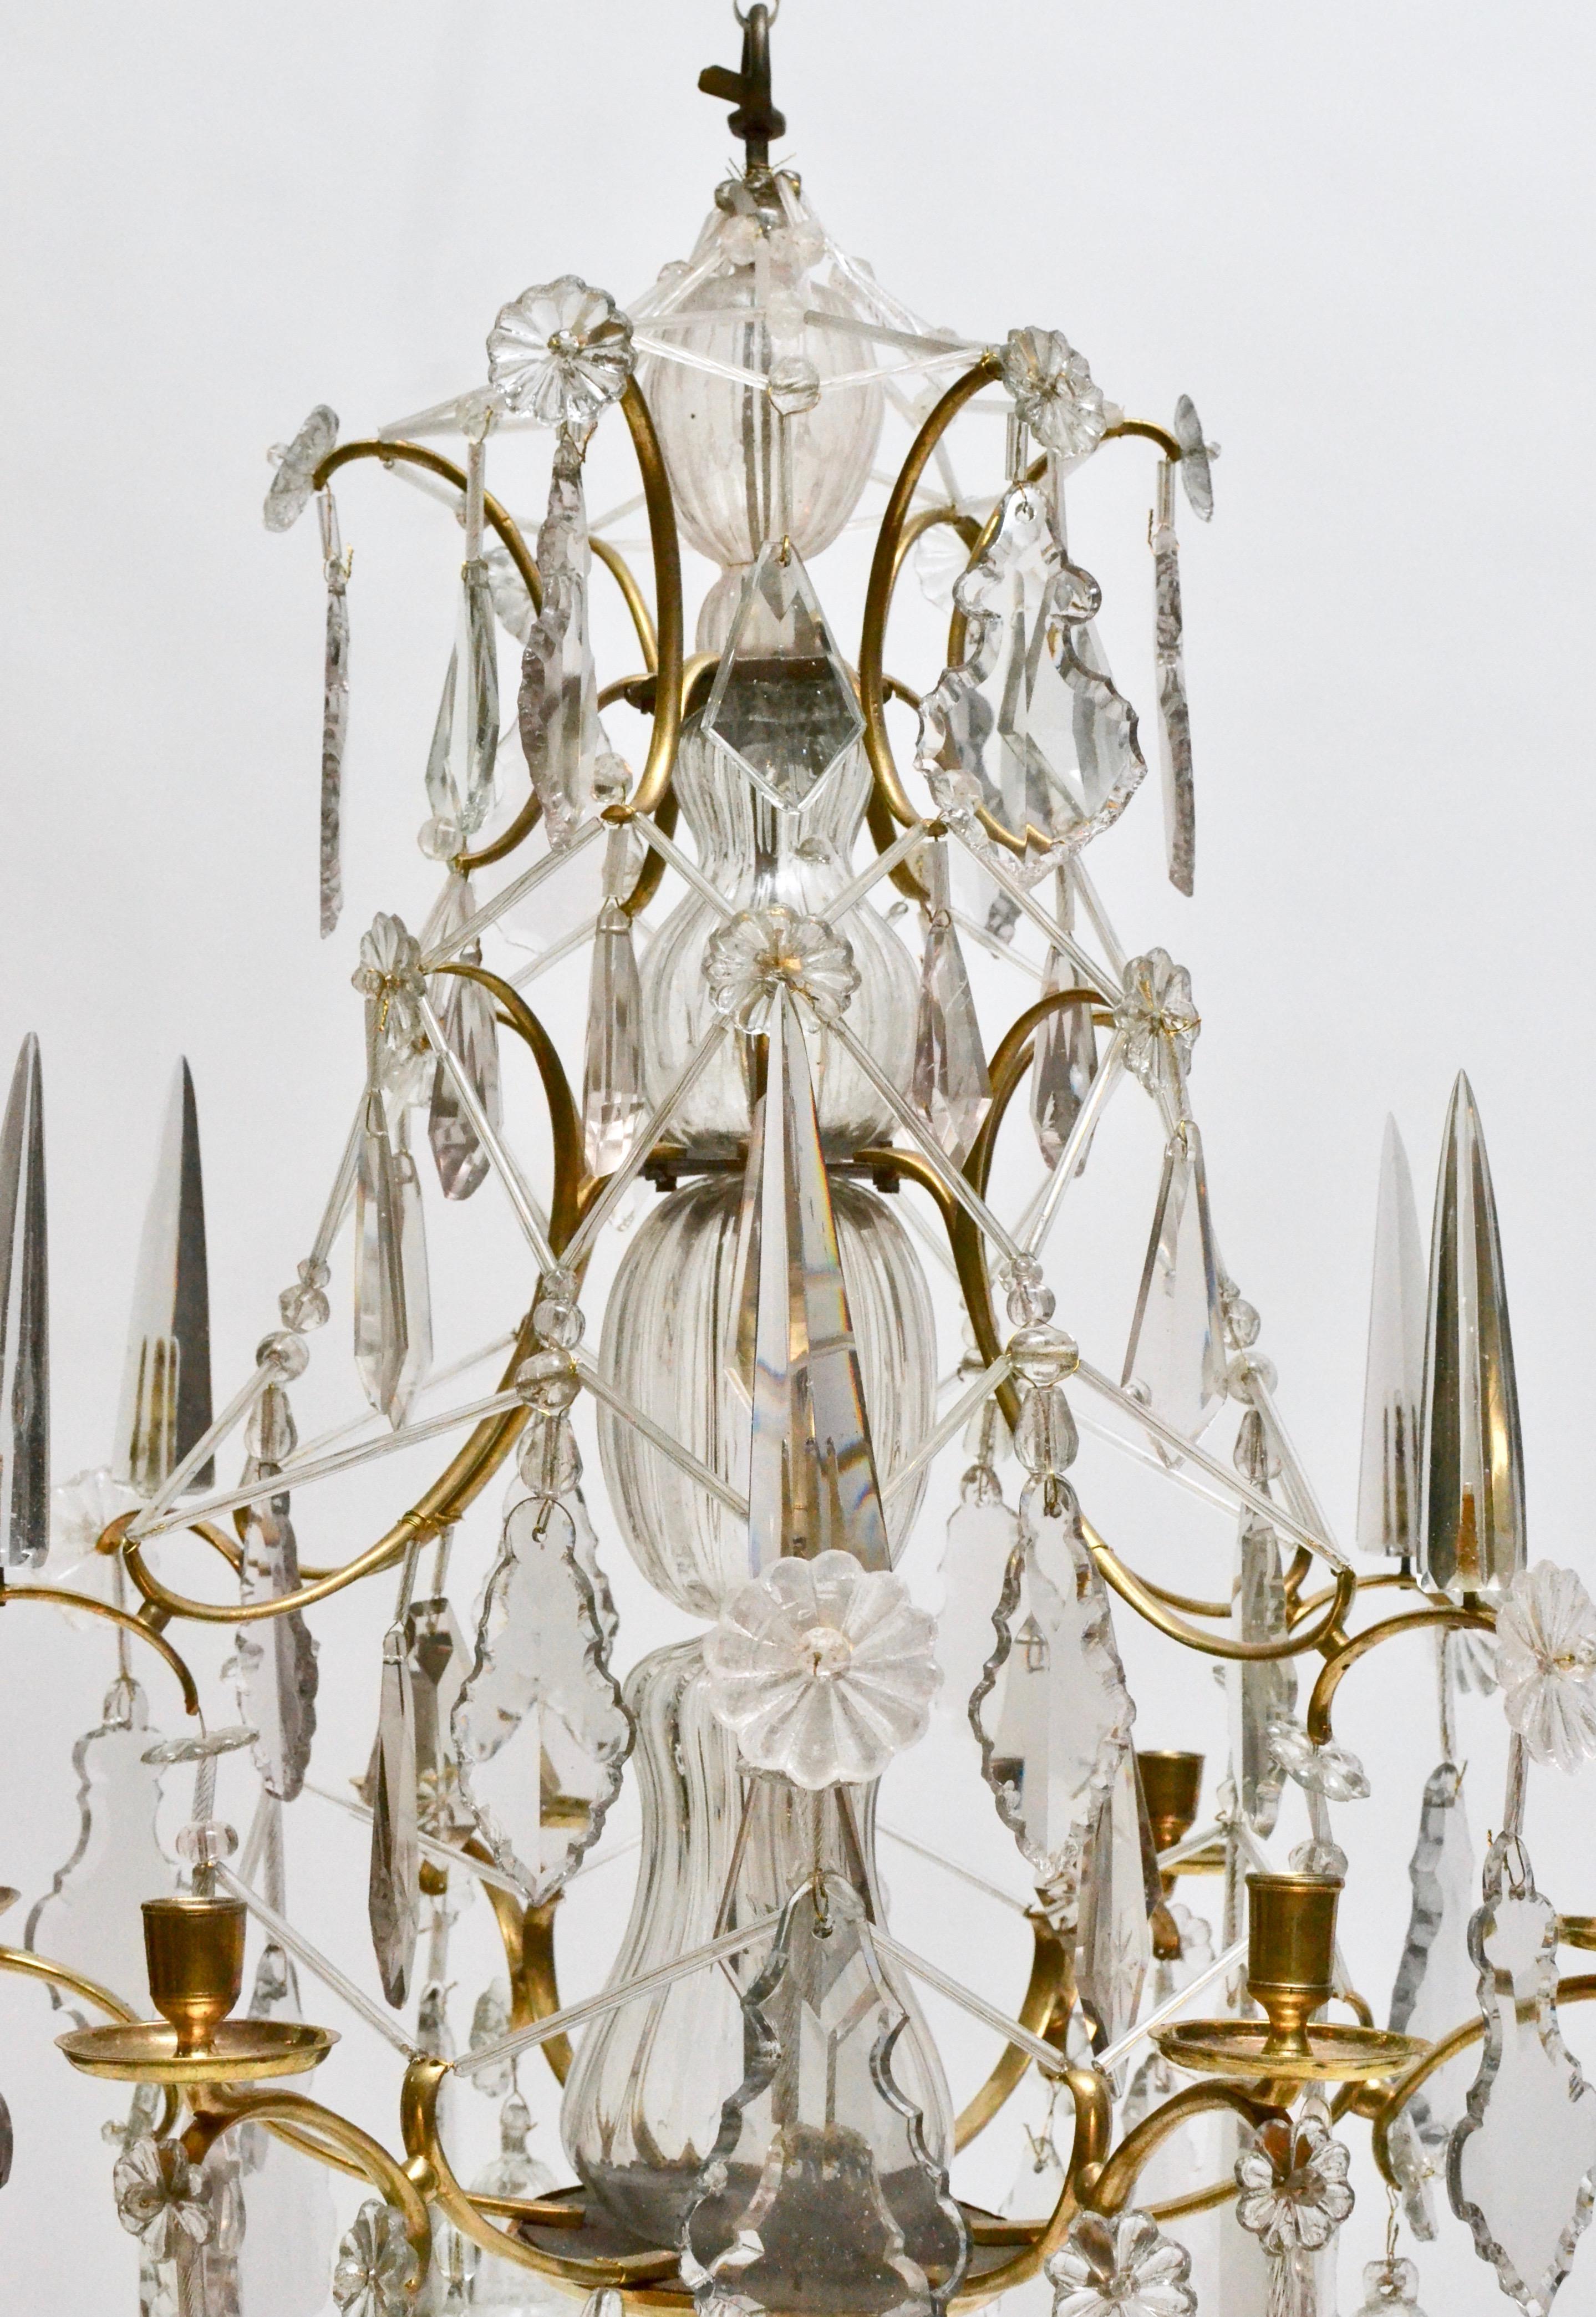 A Swedish Baroque chandelier. Made in Stockholm, 18th century. Pear-shaped brass cage with pear-shaped cut crystals and glass obelisks mounted on the outer middle section. Very nice condition.